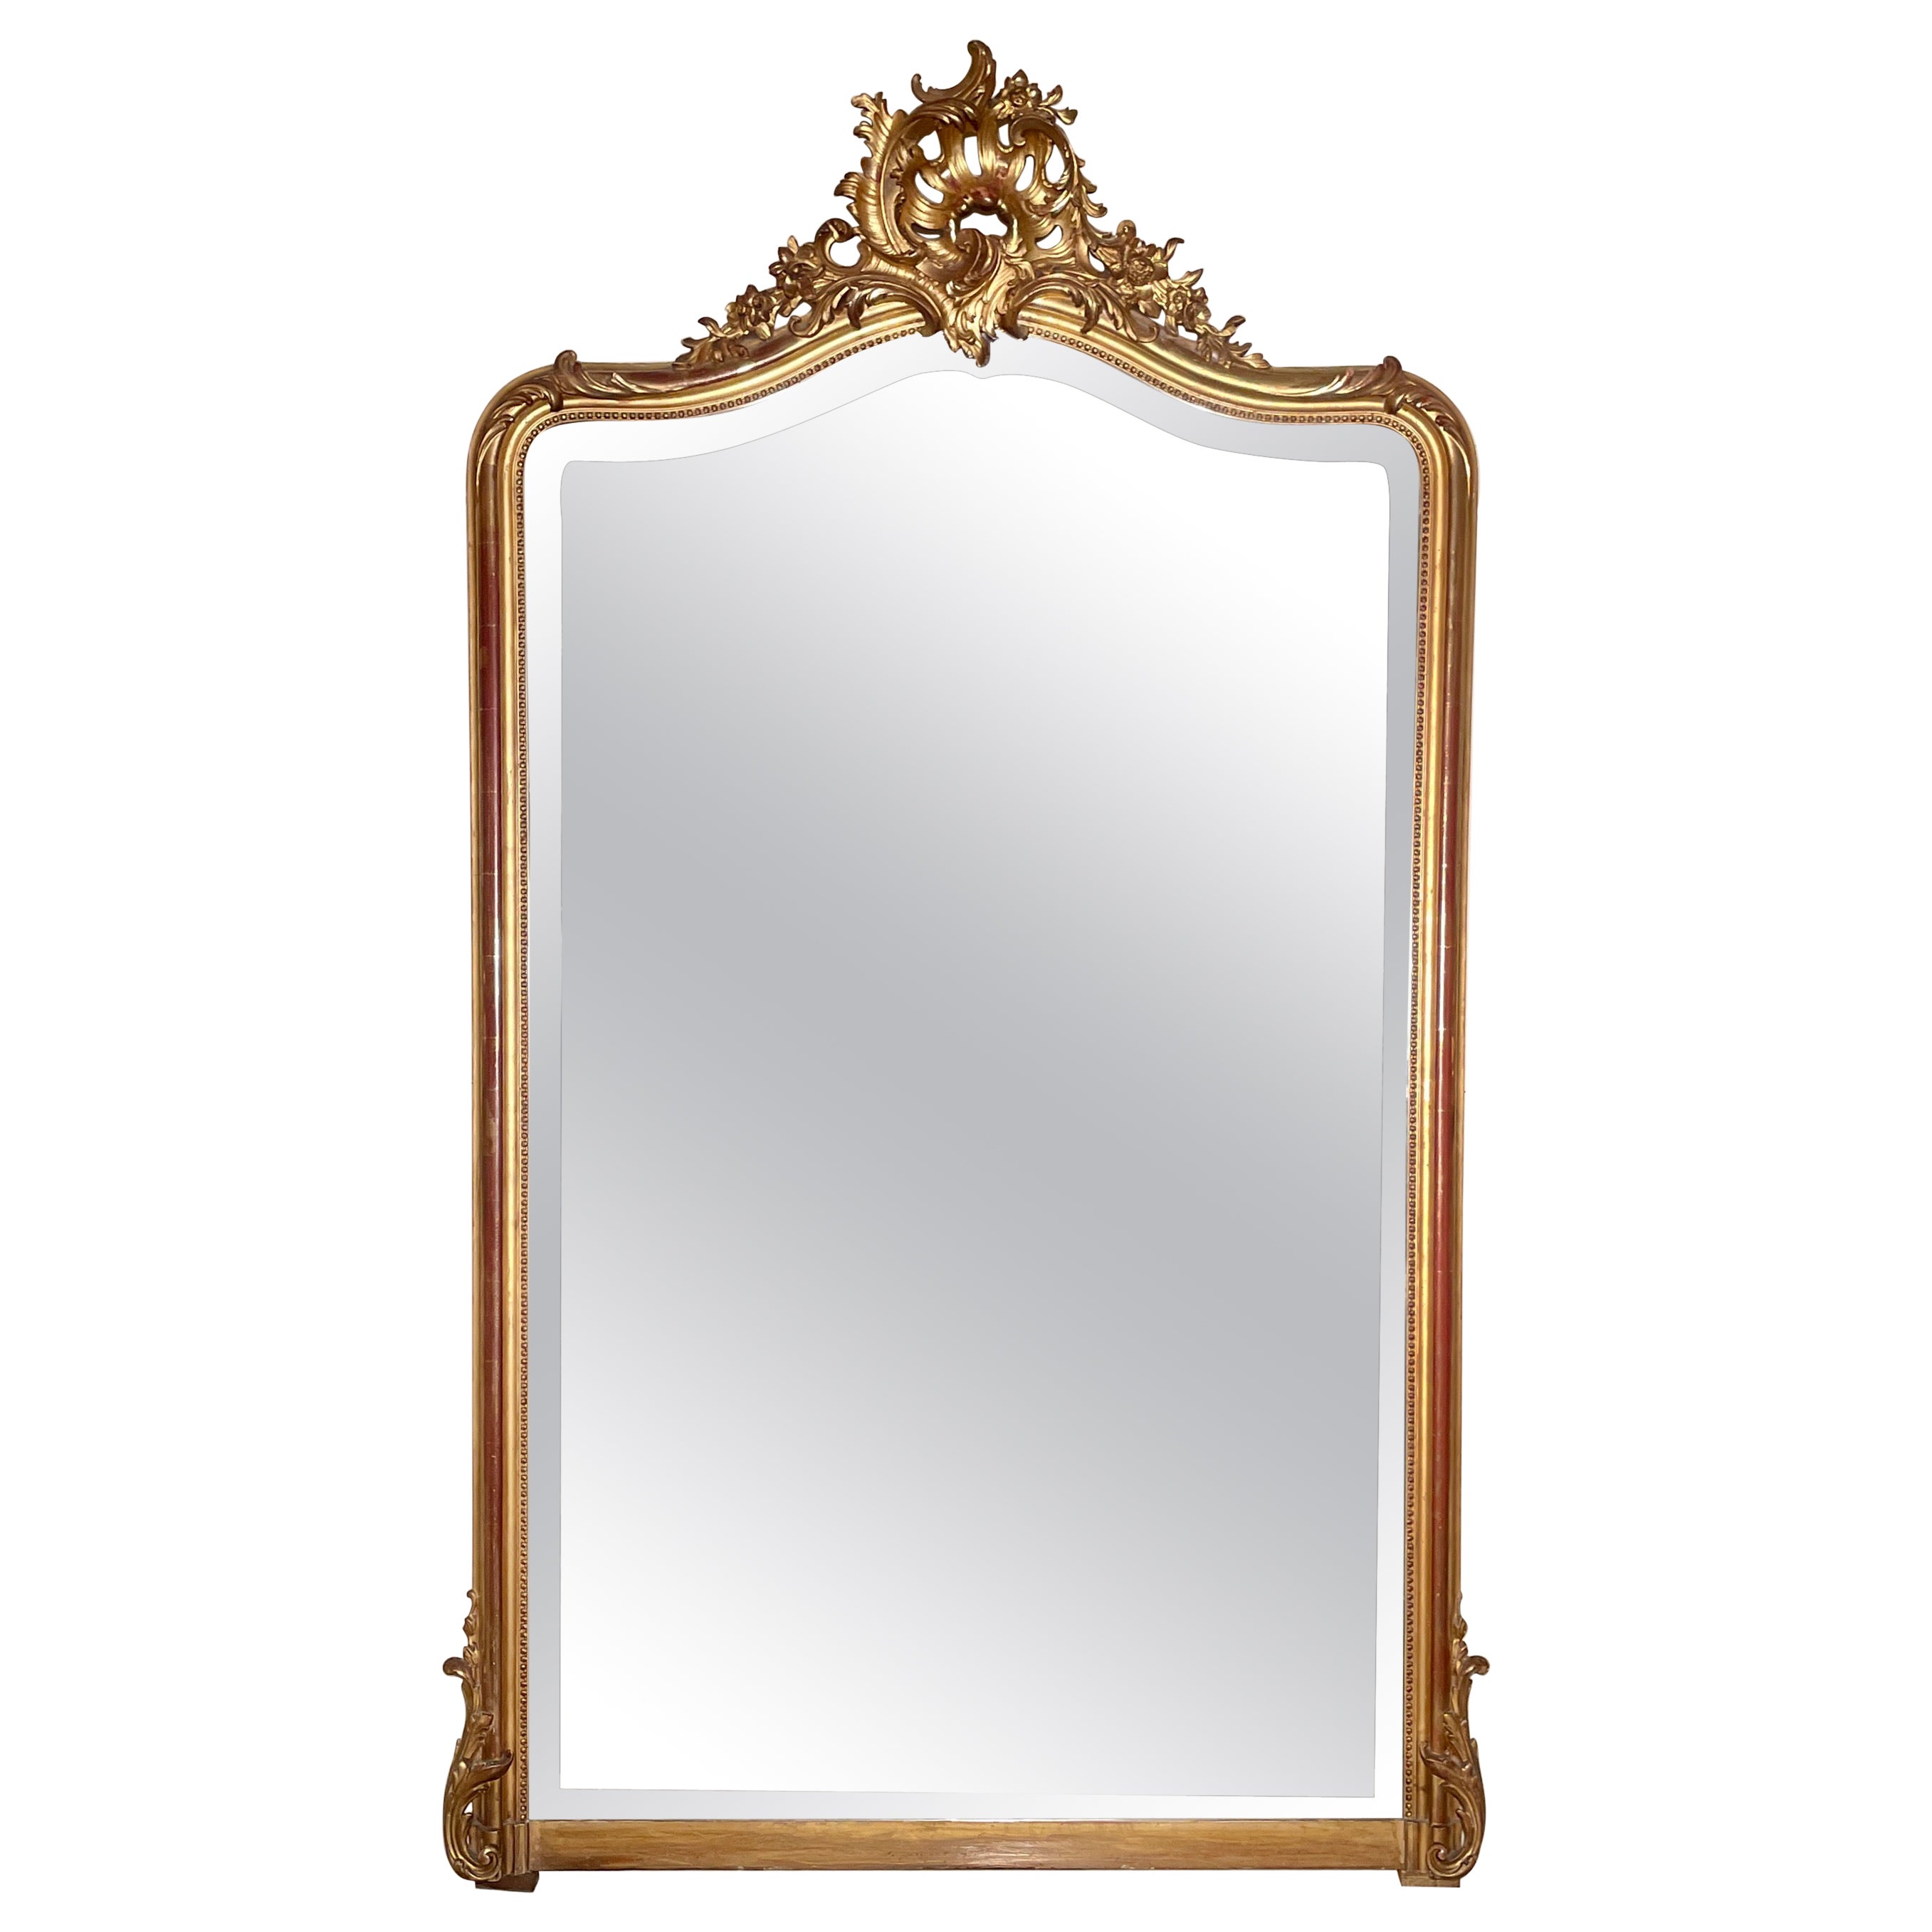 Antique French Louis XV Gold Leaf Mirror with Beveling, circa 1875-1885 For Sale